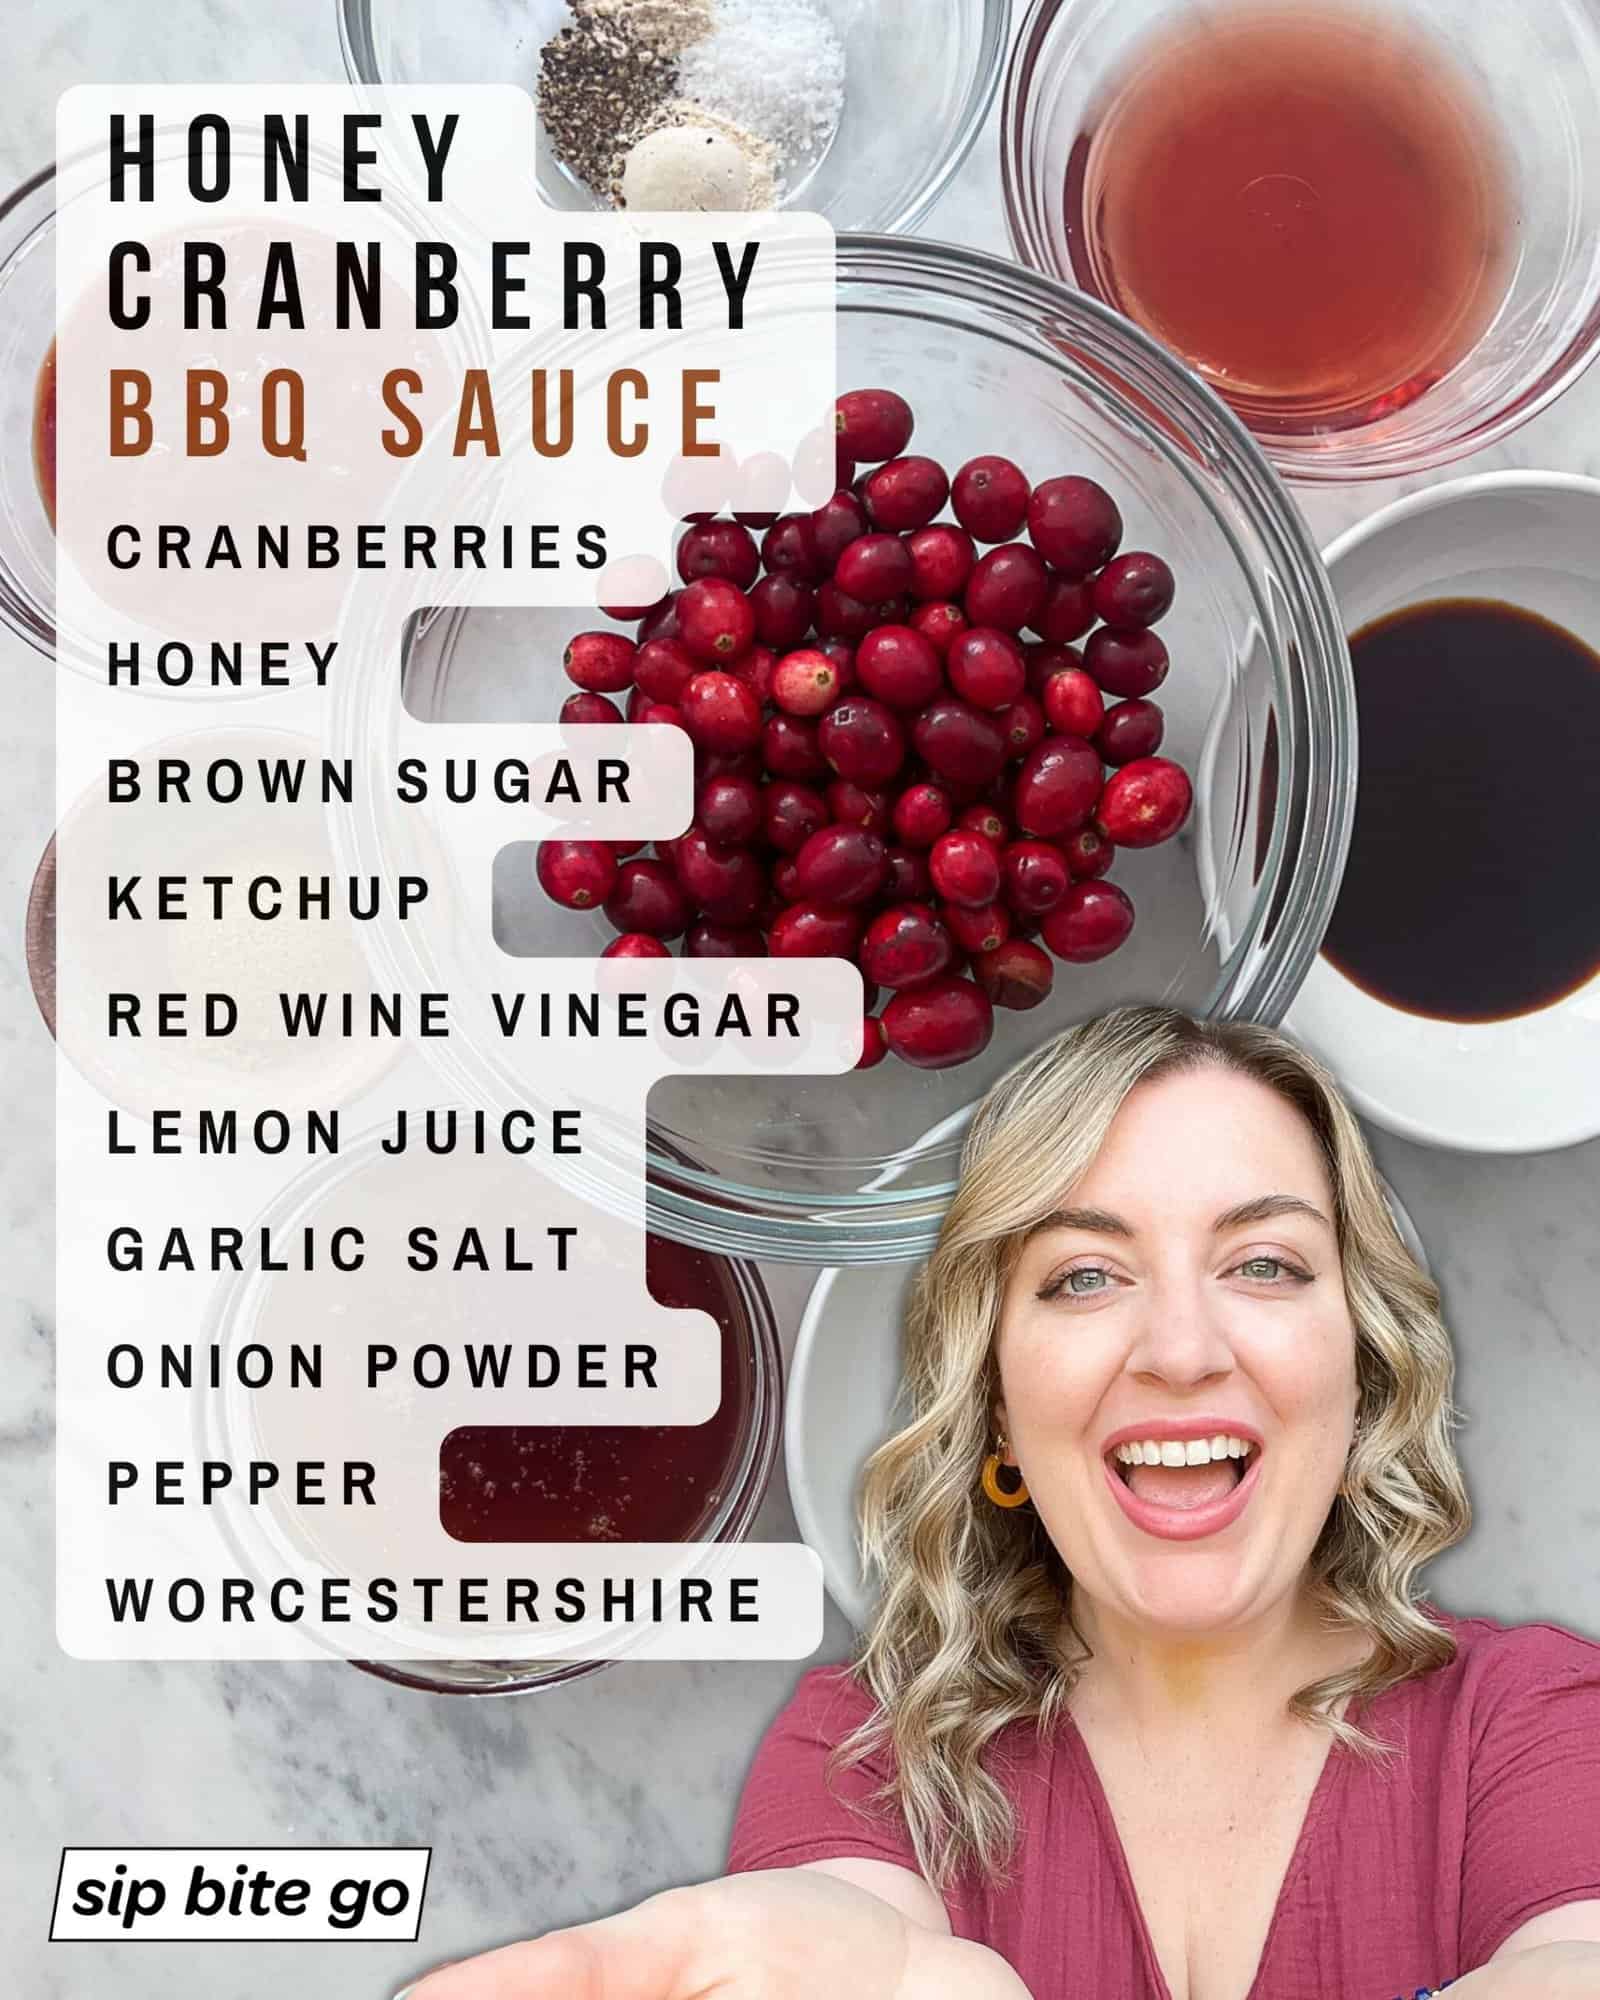 Infographic with ingredients for making Honey Cranberry BBQ Sauce from scratch with Jenna Passaro and Sip Bite Go logo